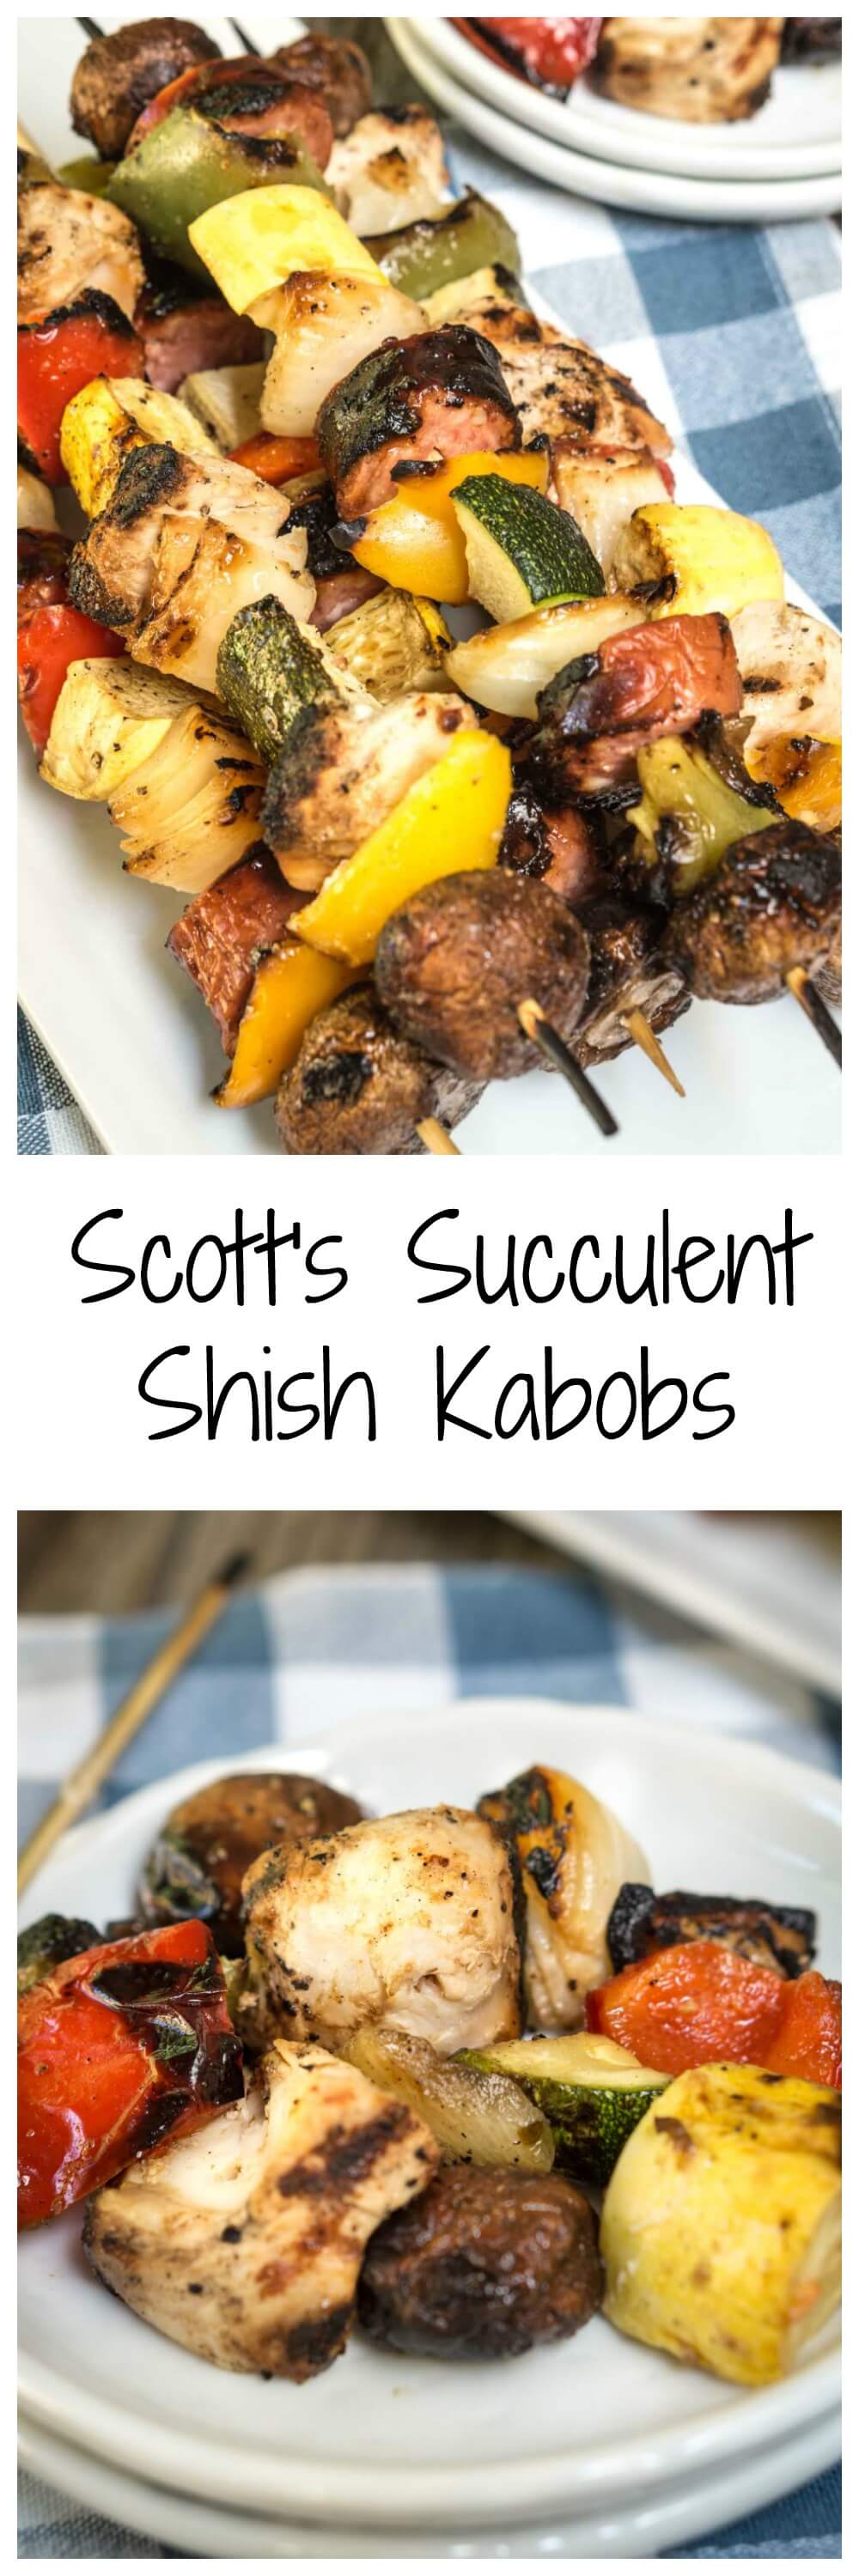 Two photo collage for Pinterest. The top photo is Shish Kabob skewers filled with grilled slices of squash, tomatoes, mushrooms, peppers, and chicken The bottom photo is of a pile of Shish Kabobs slices of squash, tomatoes, mushrooms, peppers, and chicken on a white plate over a blue checked tablecloth.  The title \"Scott\'s Succulent Shish Kabobs\" runs through the center.